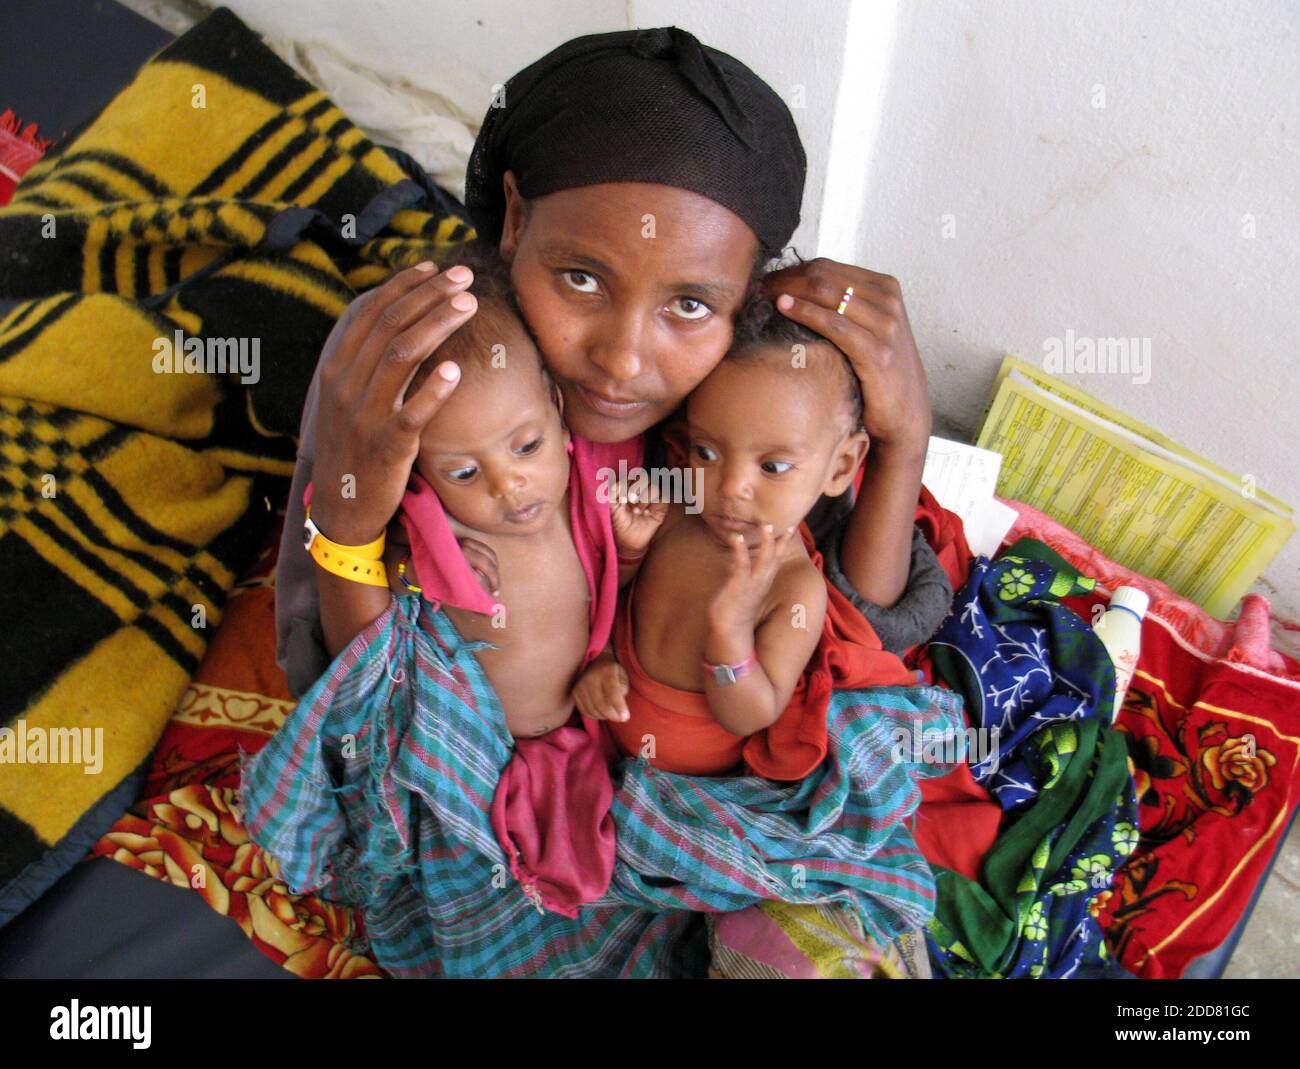 NO FILM, NO VIDEO, NO TV, NO DOCUMENTARY - Bedatu Habiba cradles her 6-month-old twins, both suffering from severe malnutrition, at a clinic in Shashemene, Ethiopia, May 28, 2008. In the poor farming villages around Shashemene, in drought-ravaged southern Ethiopia, aid workers believe that hundreds and perhaps thousands more children are starving. Photo by Shashank Bengali/MCT/ABACAPRESS.COM Stock Photo